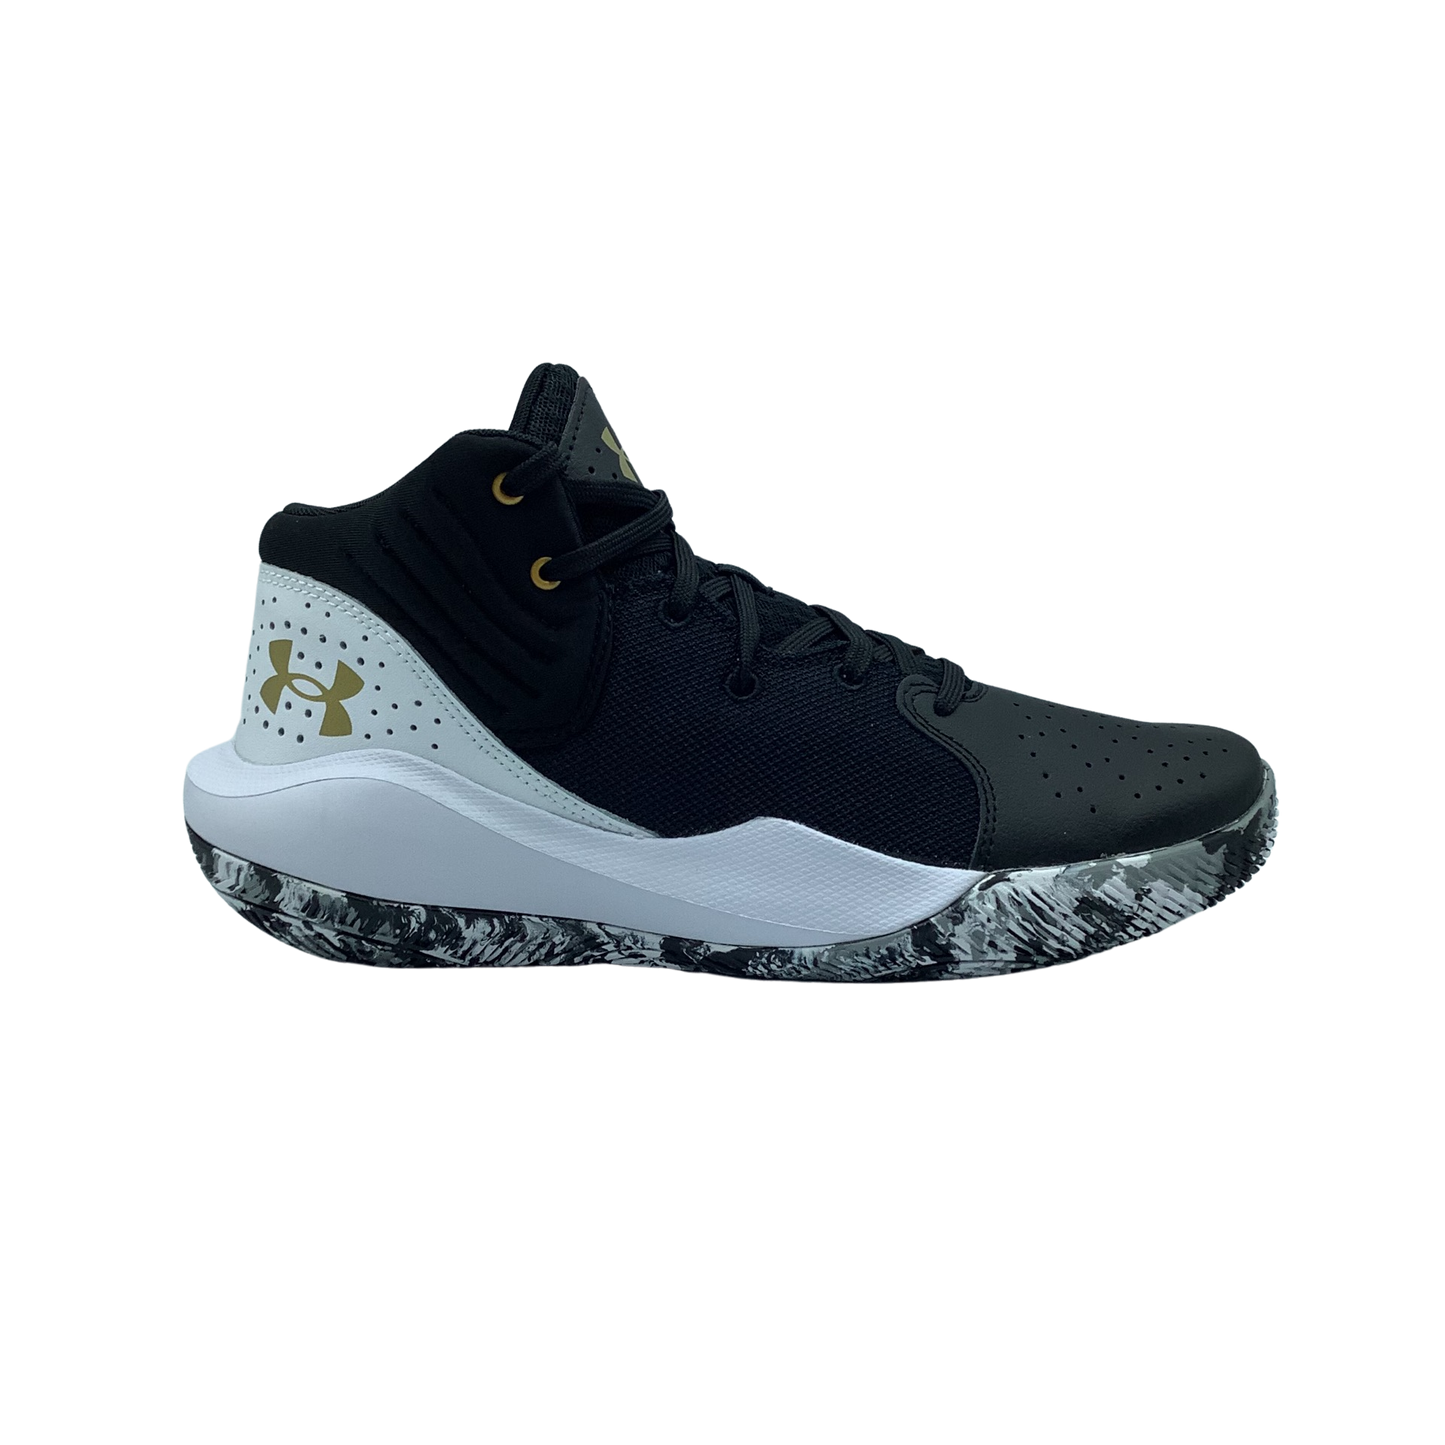 Under Armour Ua Jet Mid Basketball Shoes in Gray for Men